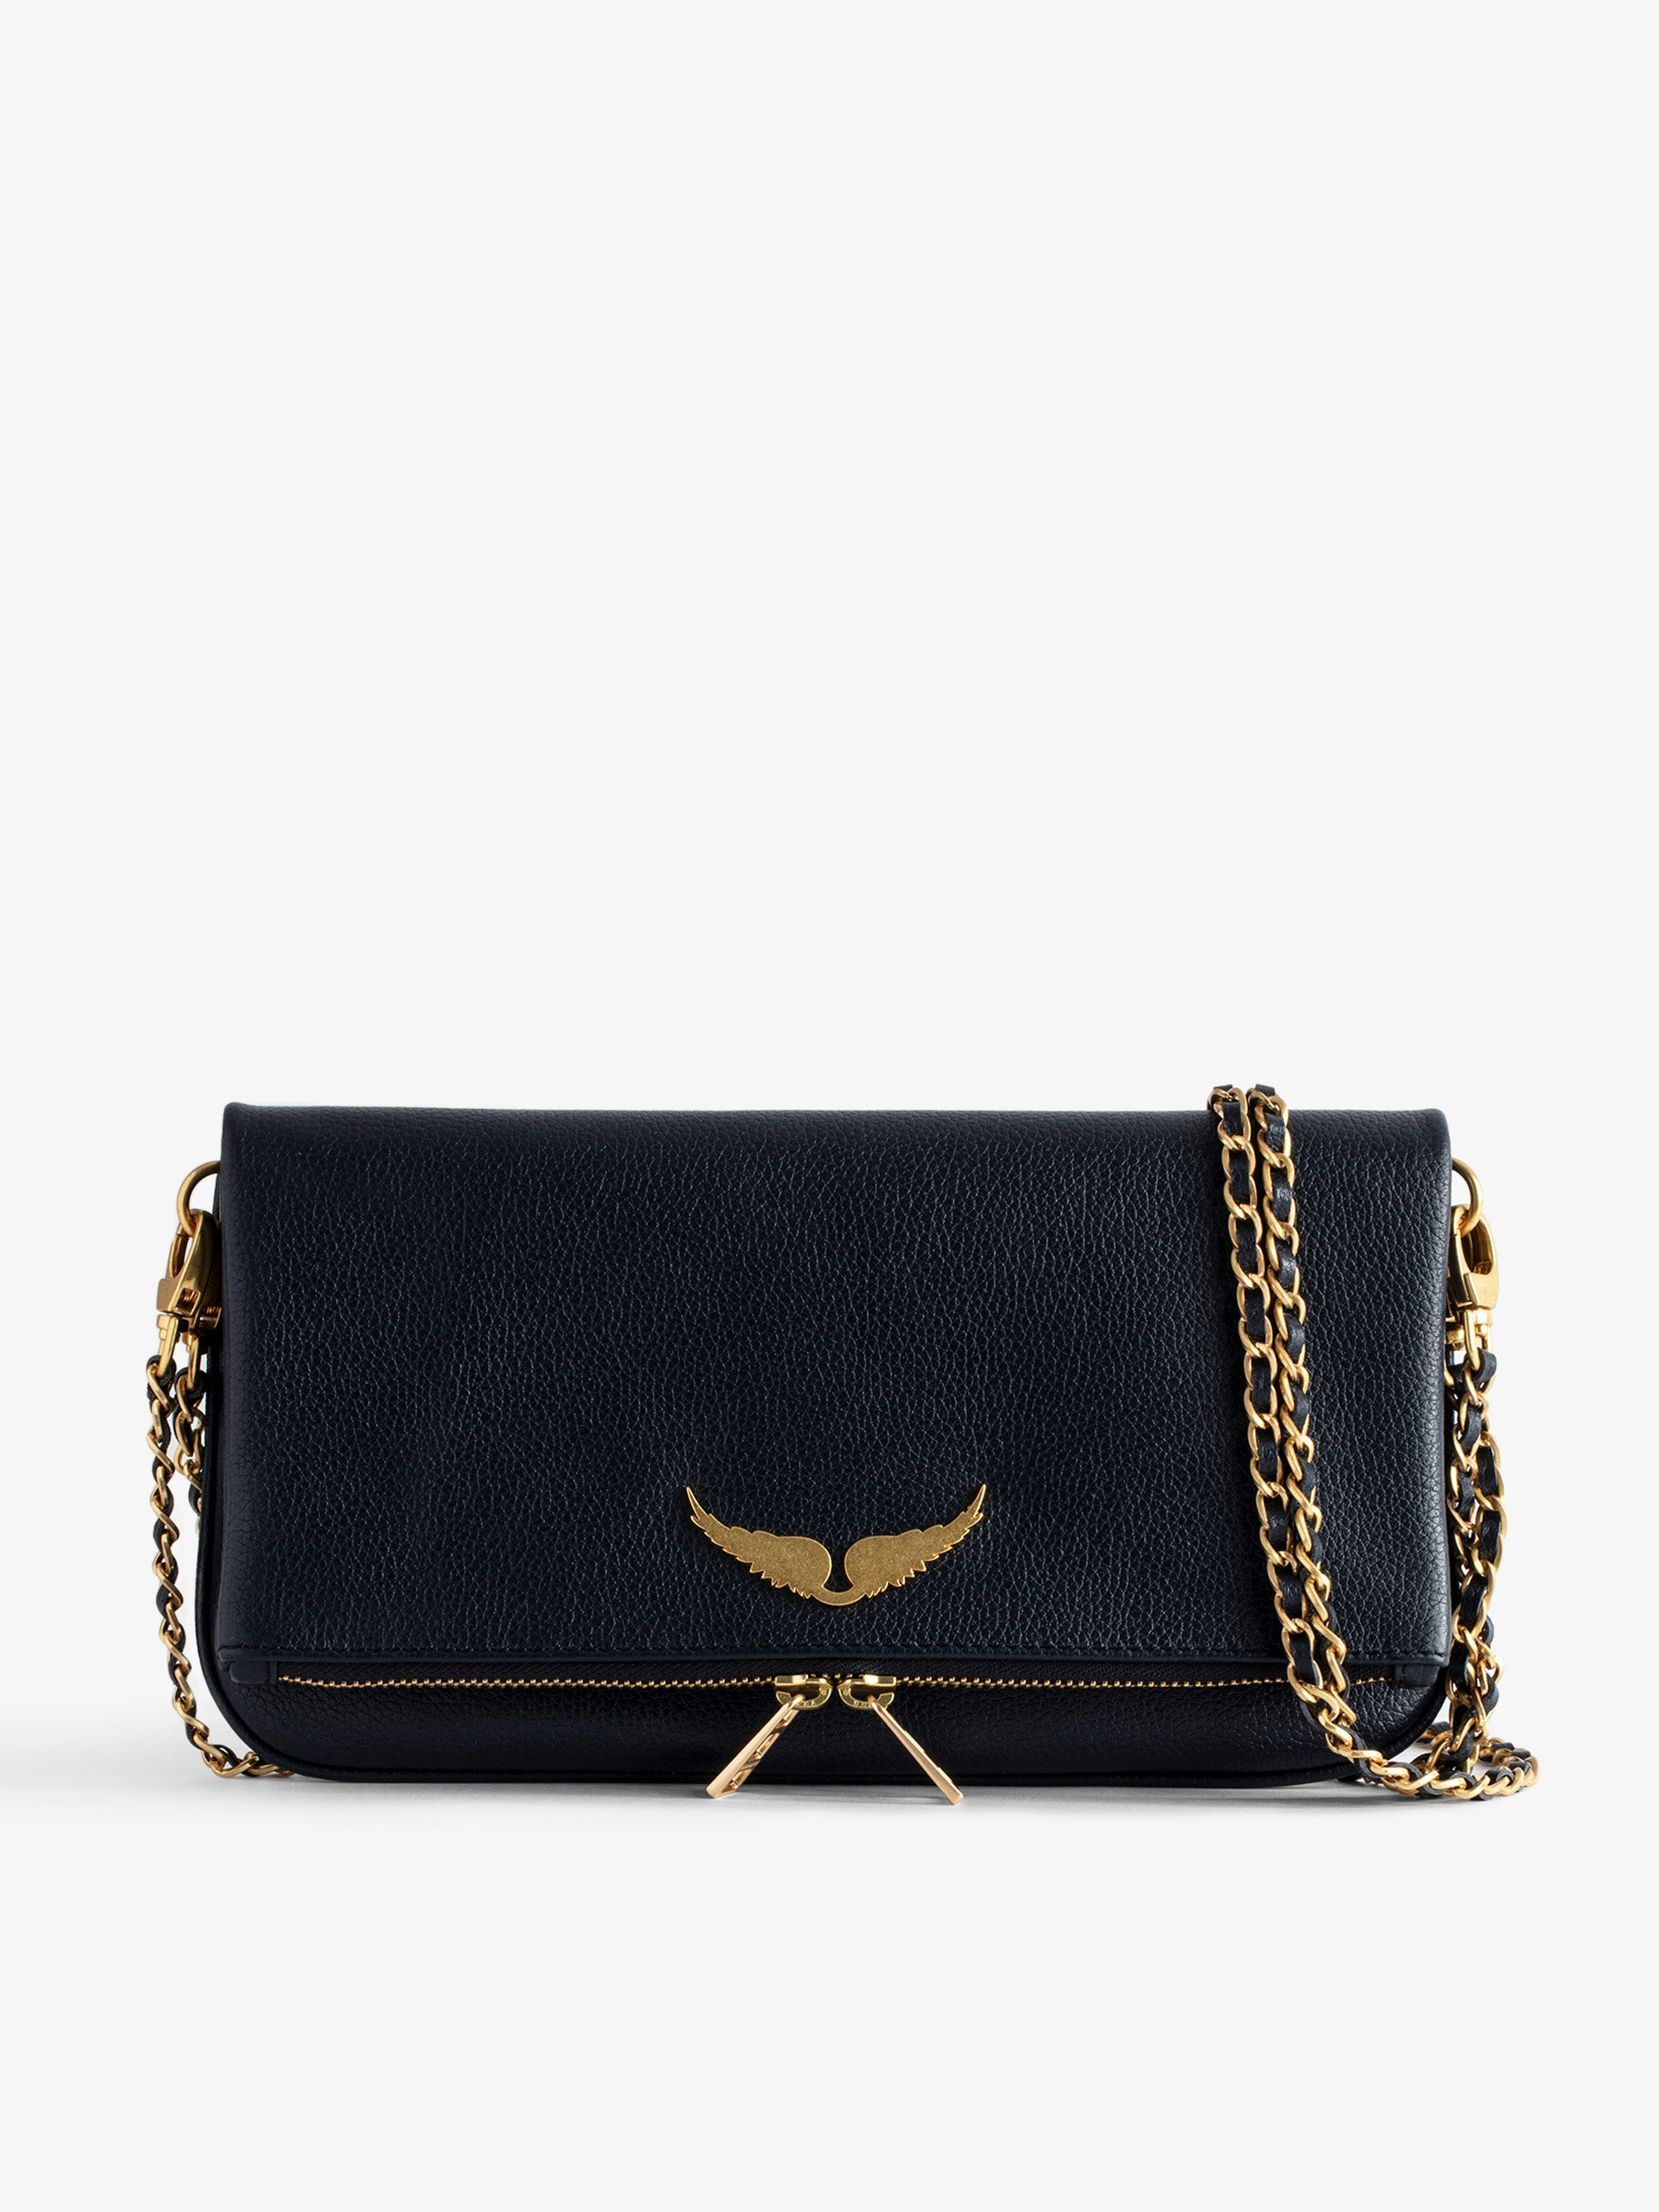 Rock Clutch - Women’s navy blue grained leather clutch with double leather and metal chain strap.